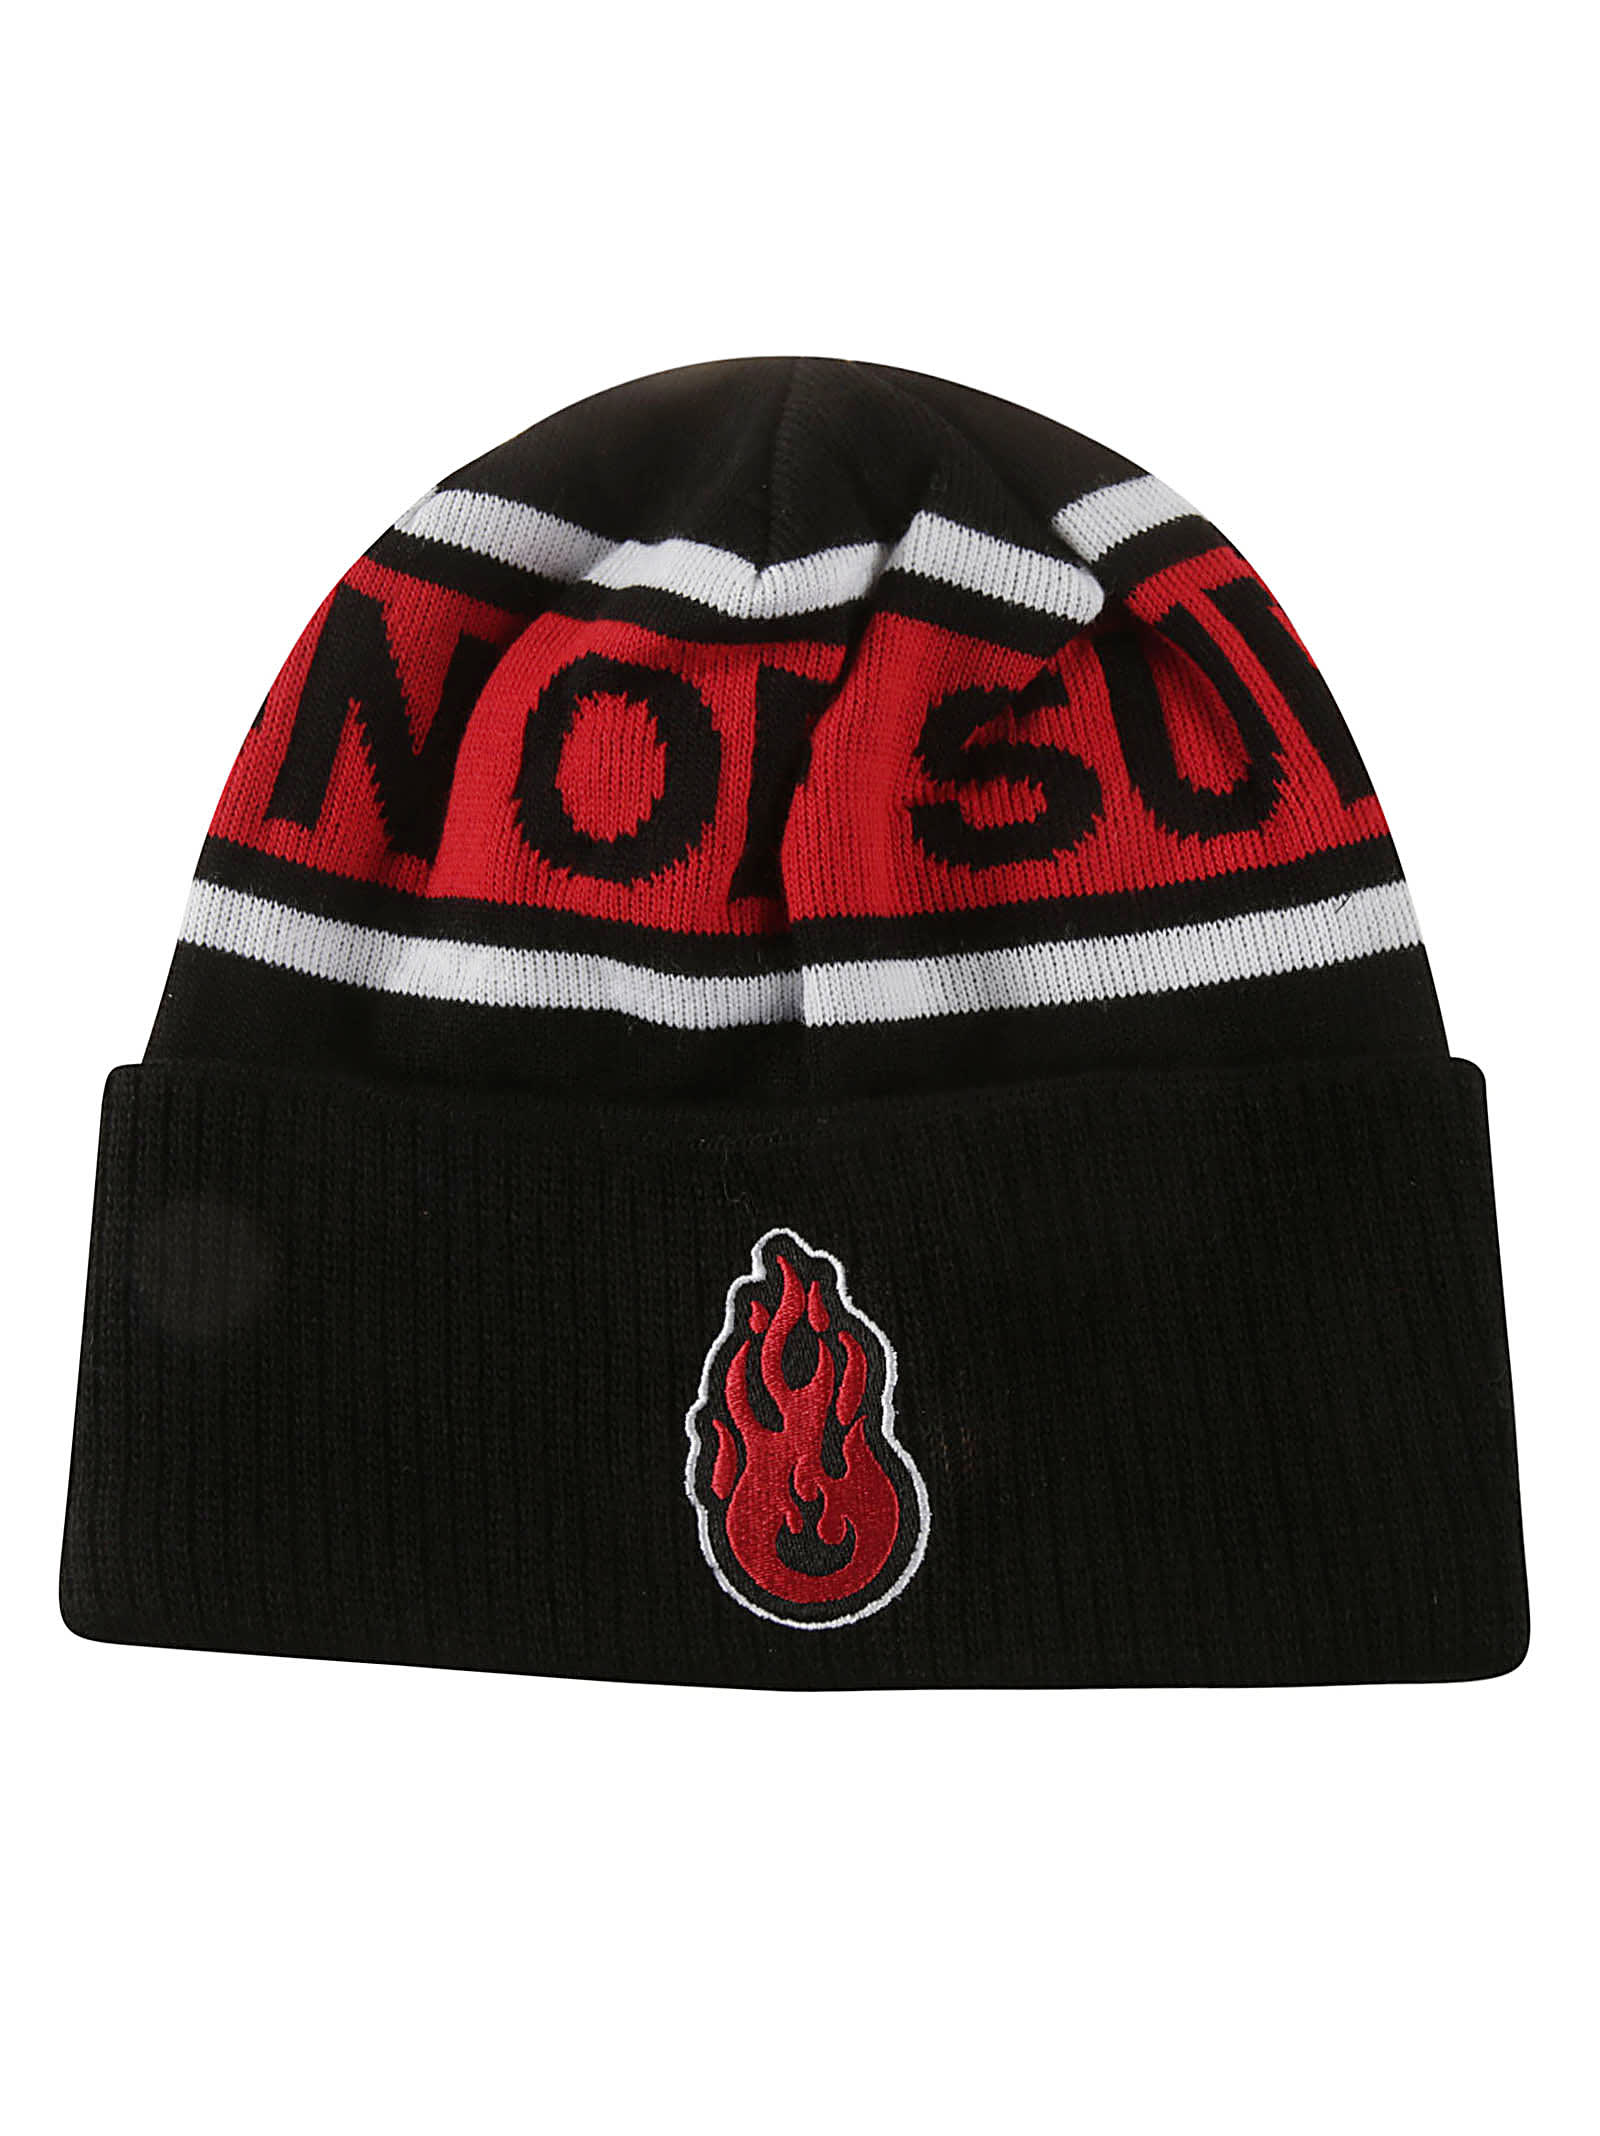 Vision of Super Flame Embroidered Logo Beanie